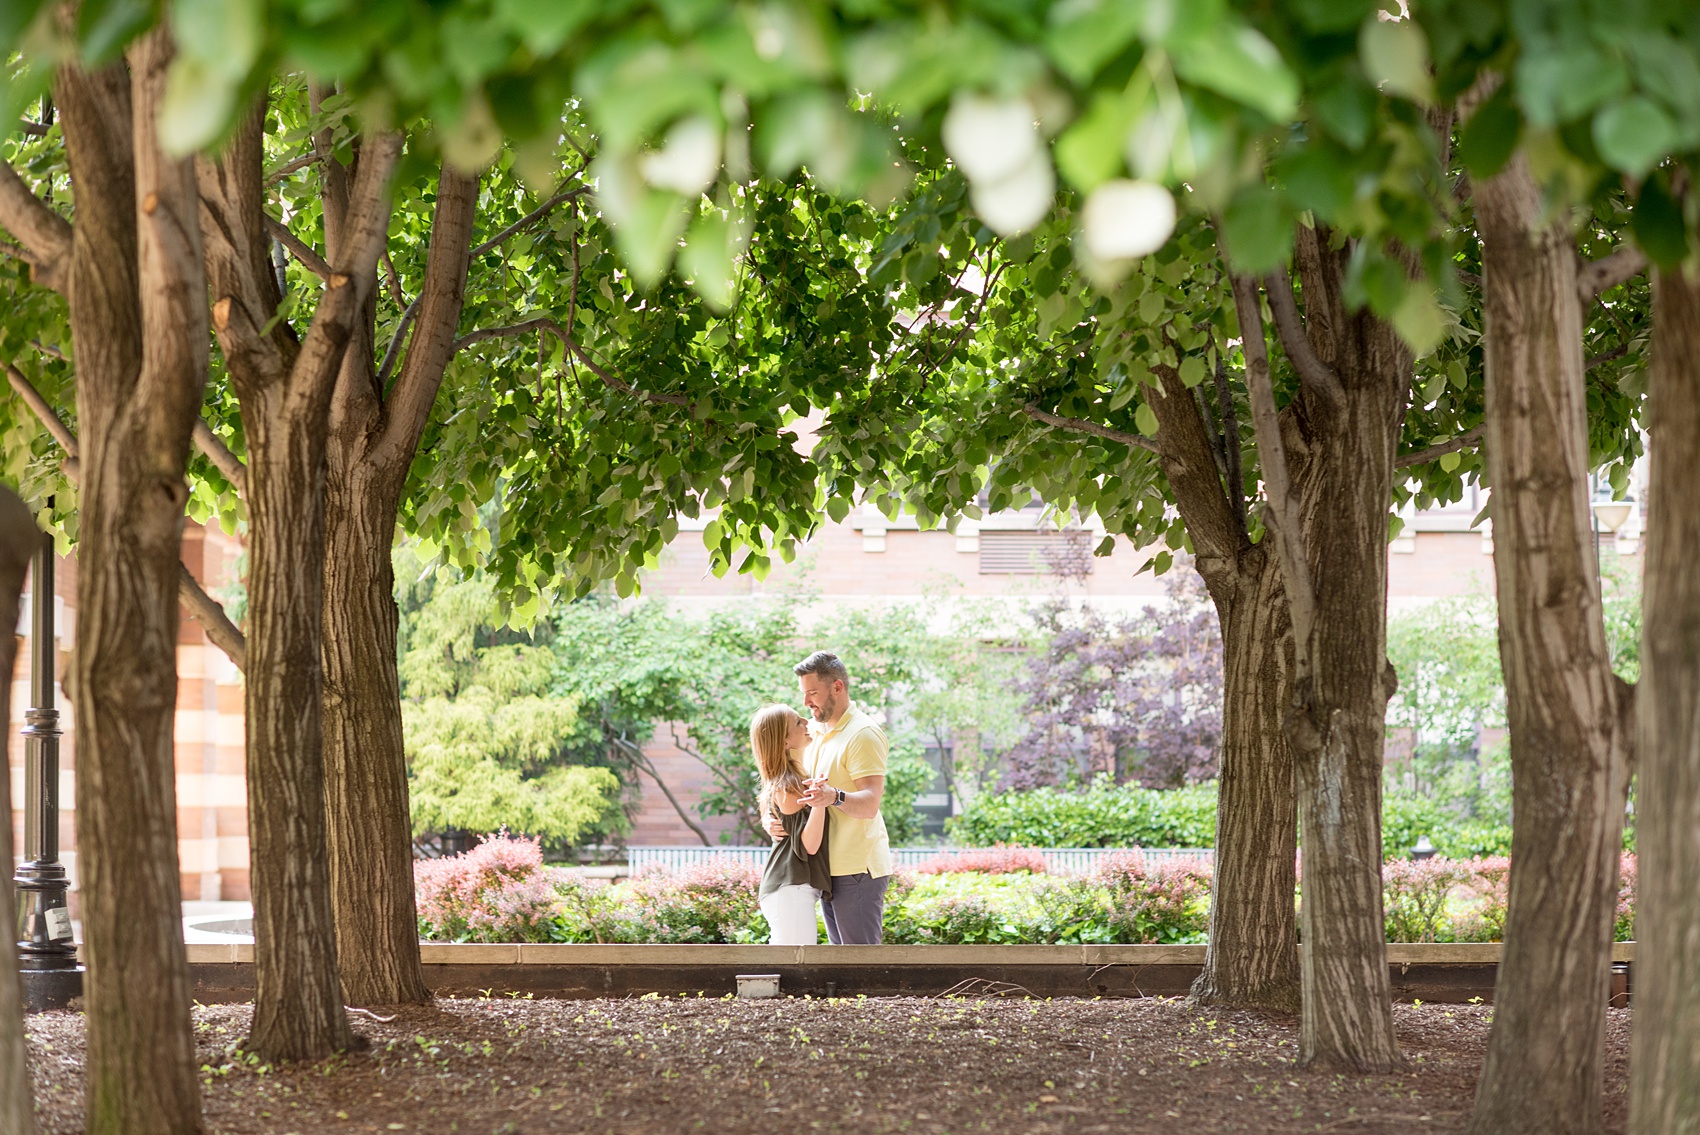 Spring Hoboken Engagement Photos by Mikkel Paige Photography with the couple under the trees.